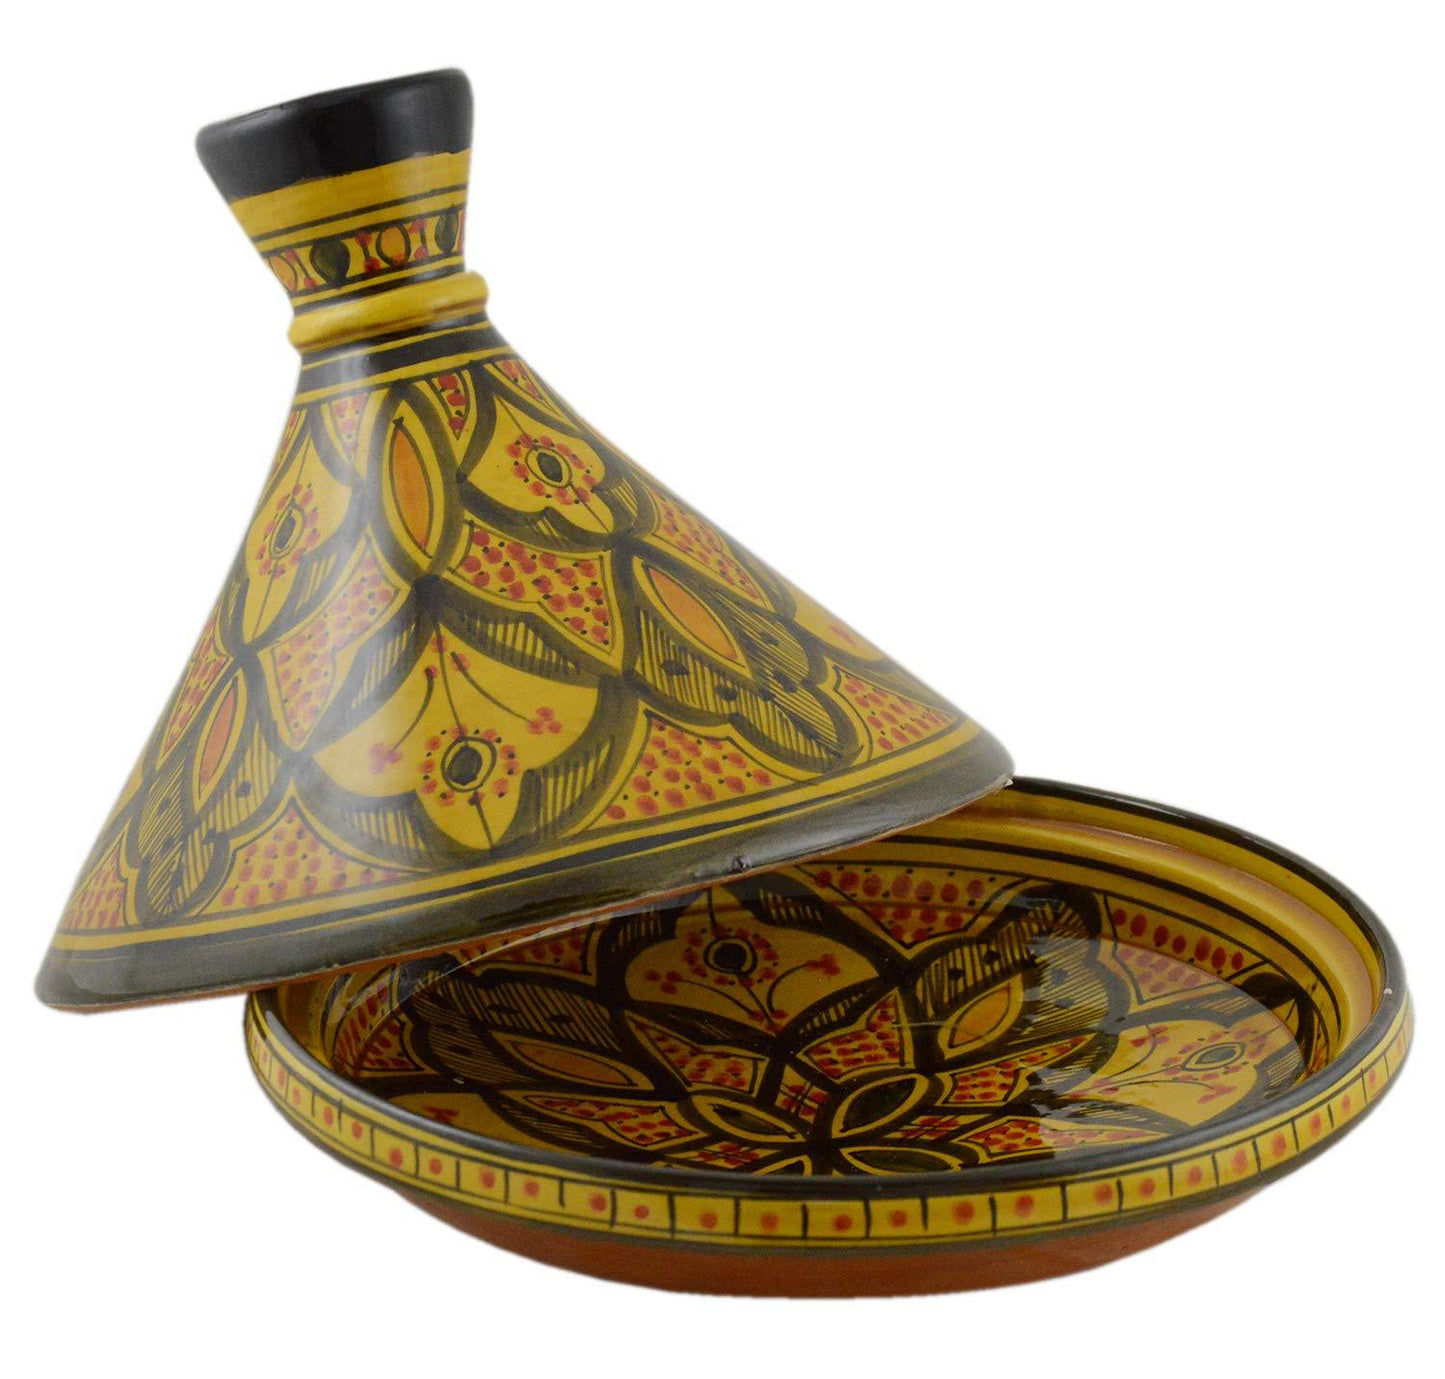 Moroccan Handmade Serving Tagine Exquisite Ceramic With Vivid colors Traditional 12 inches Across X Large - CookCave